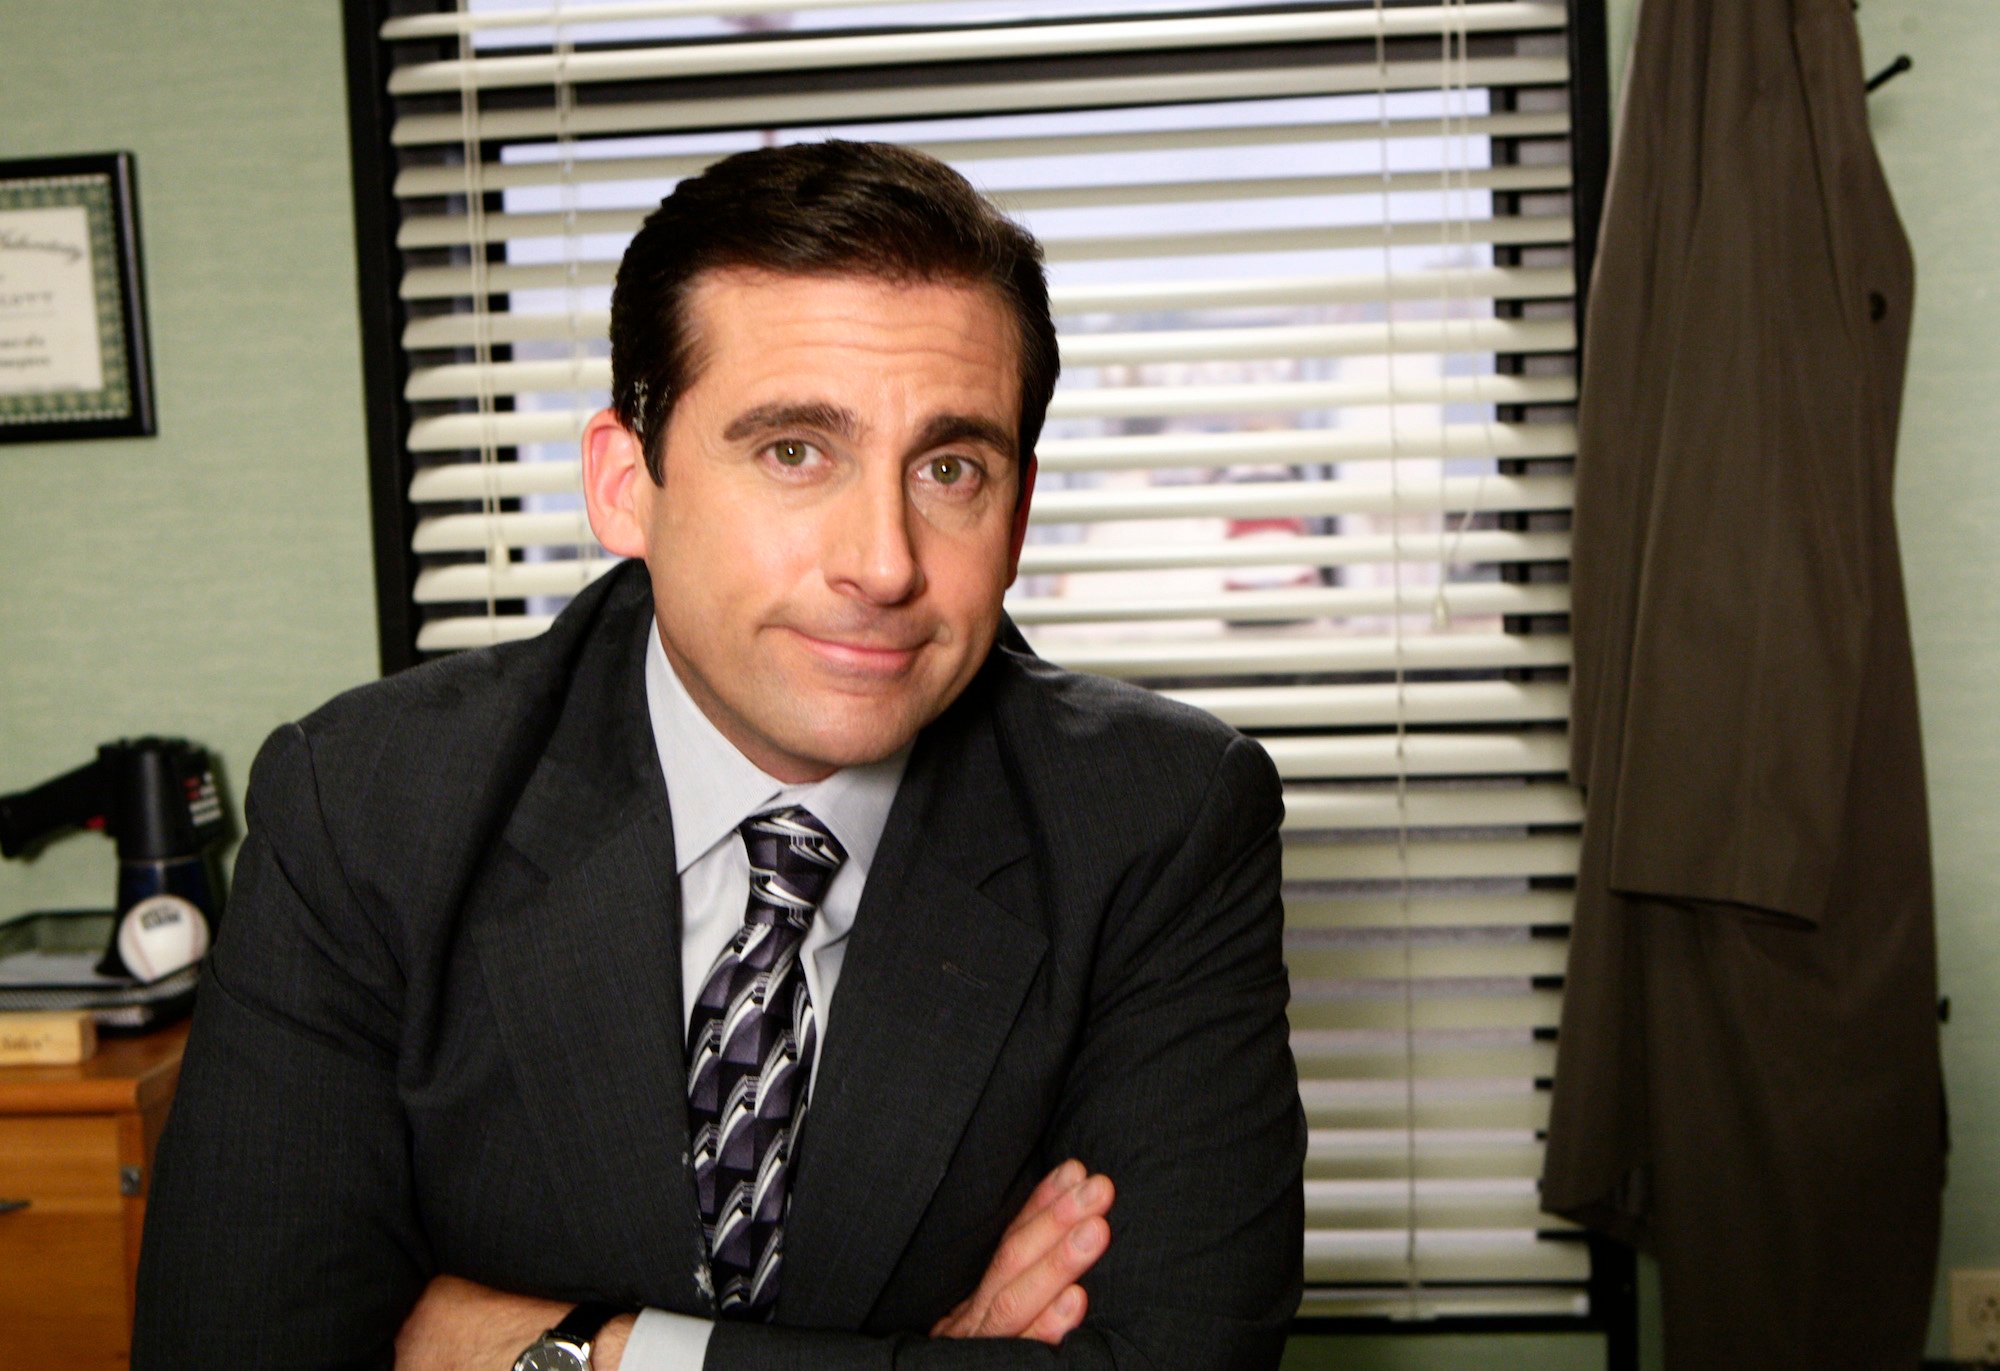 Steve Carell wearing a black suit in NBC's 'The Office.'